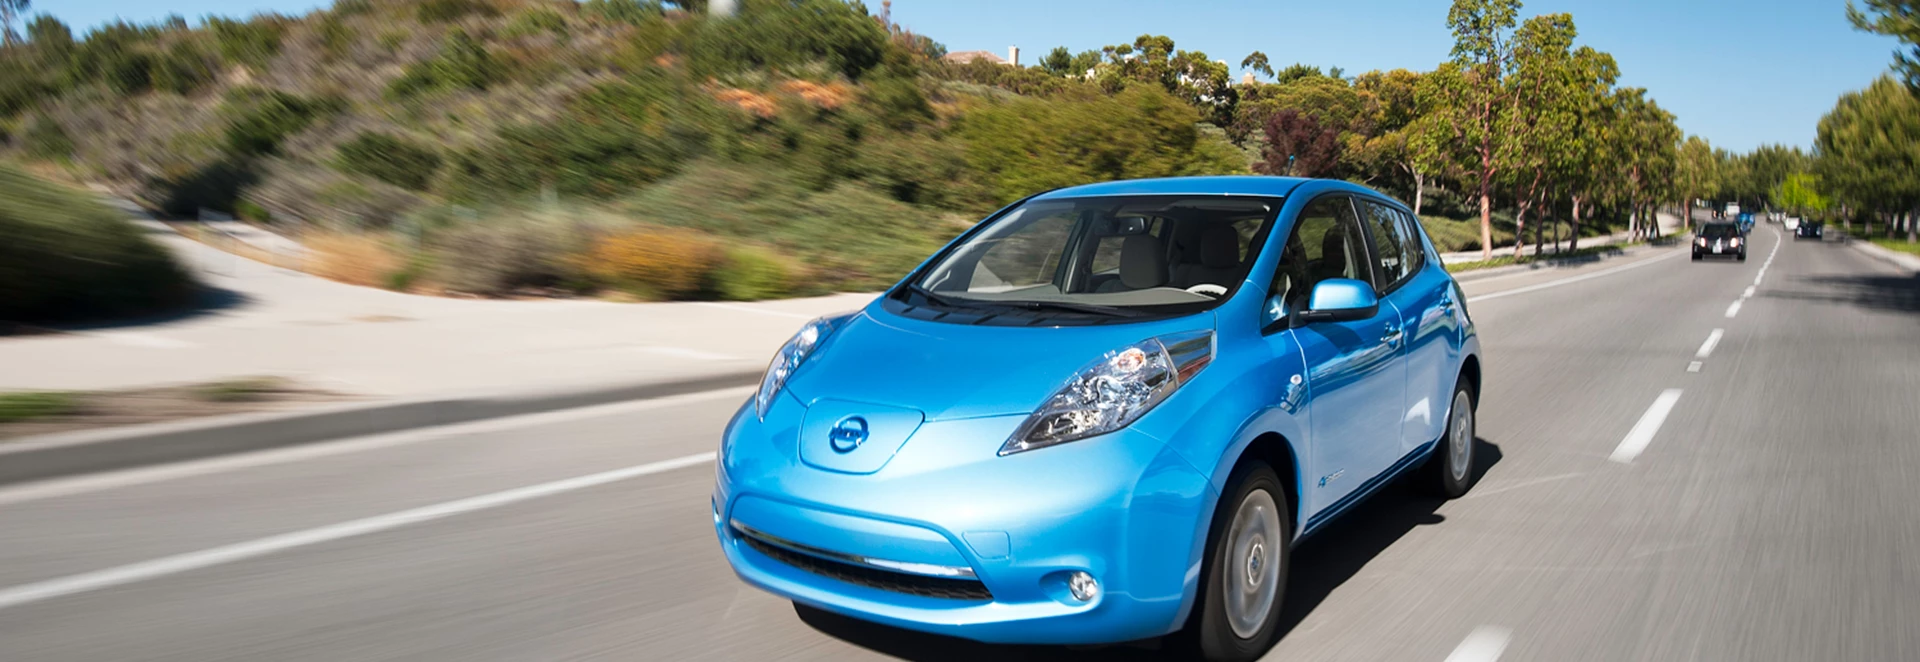 Nissan Leaf test drive and 2013 